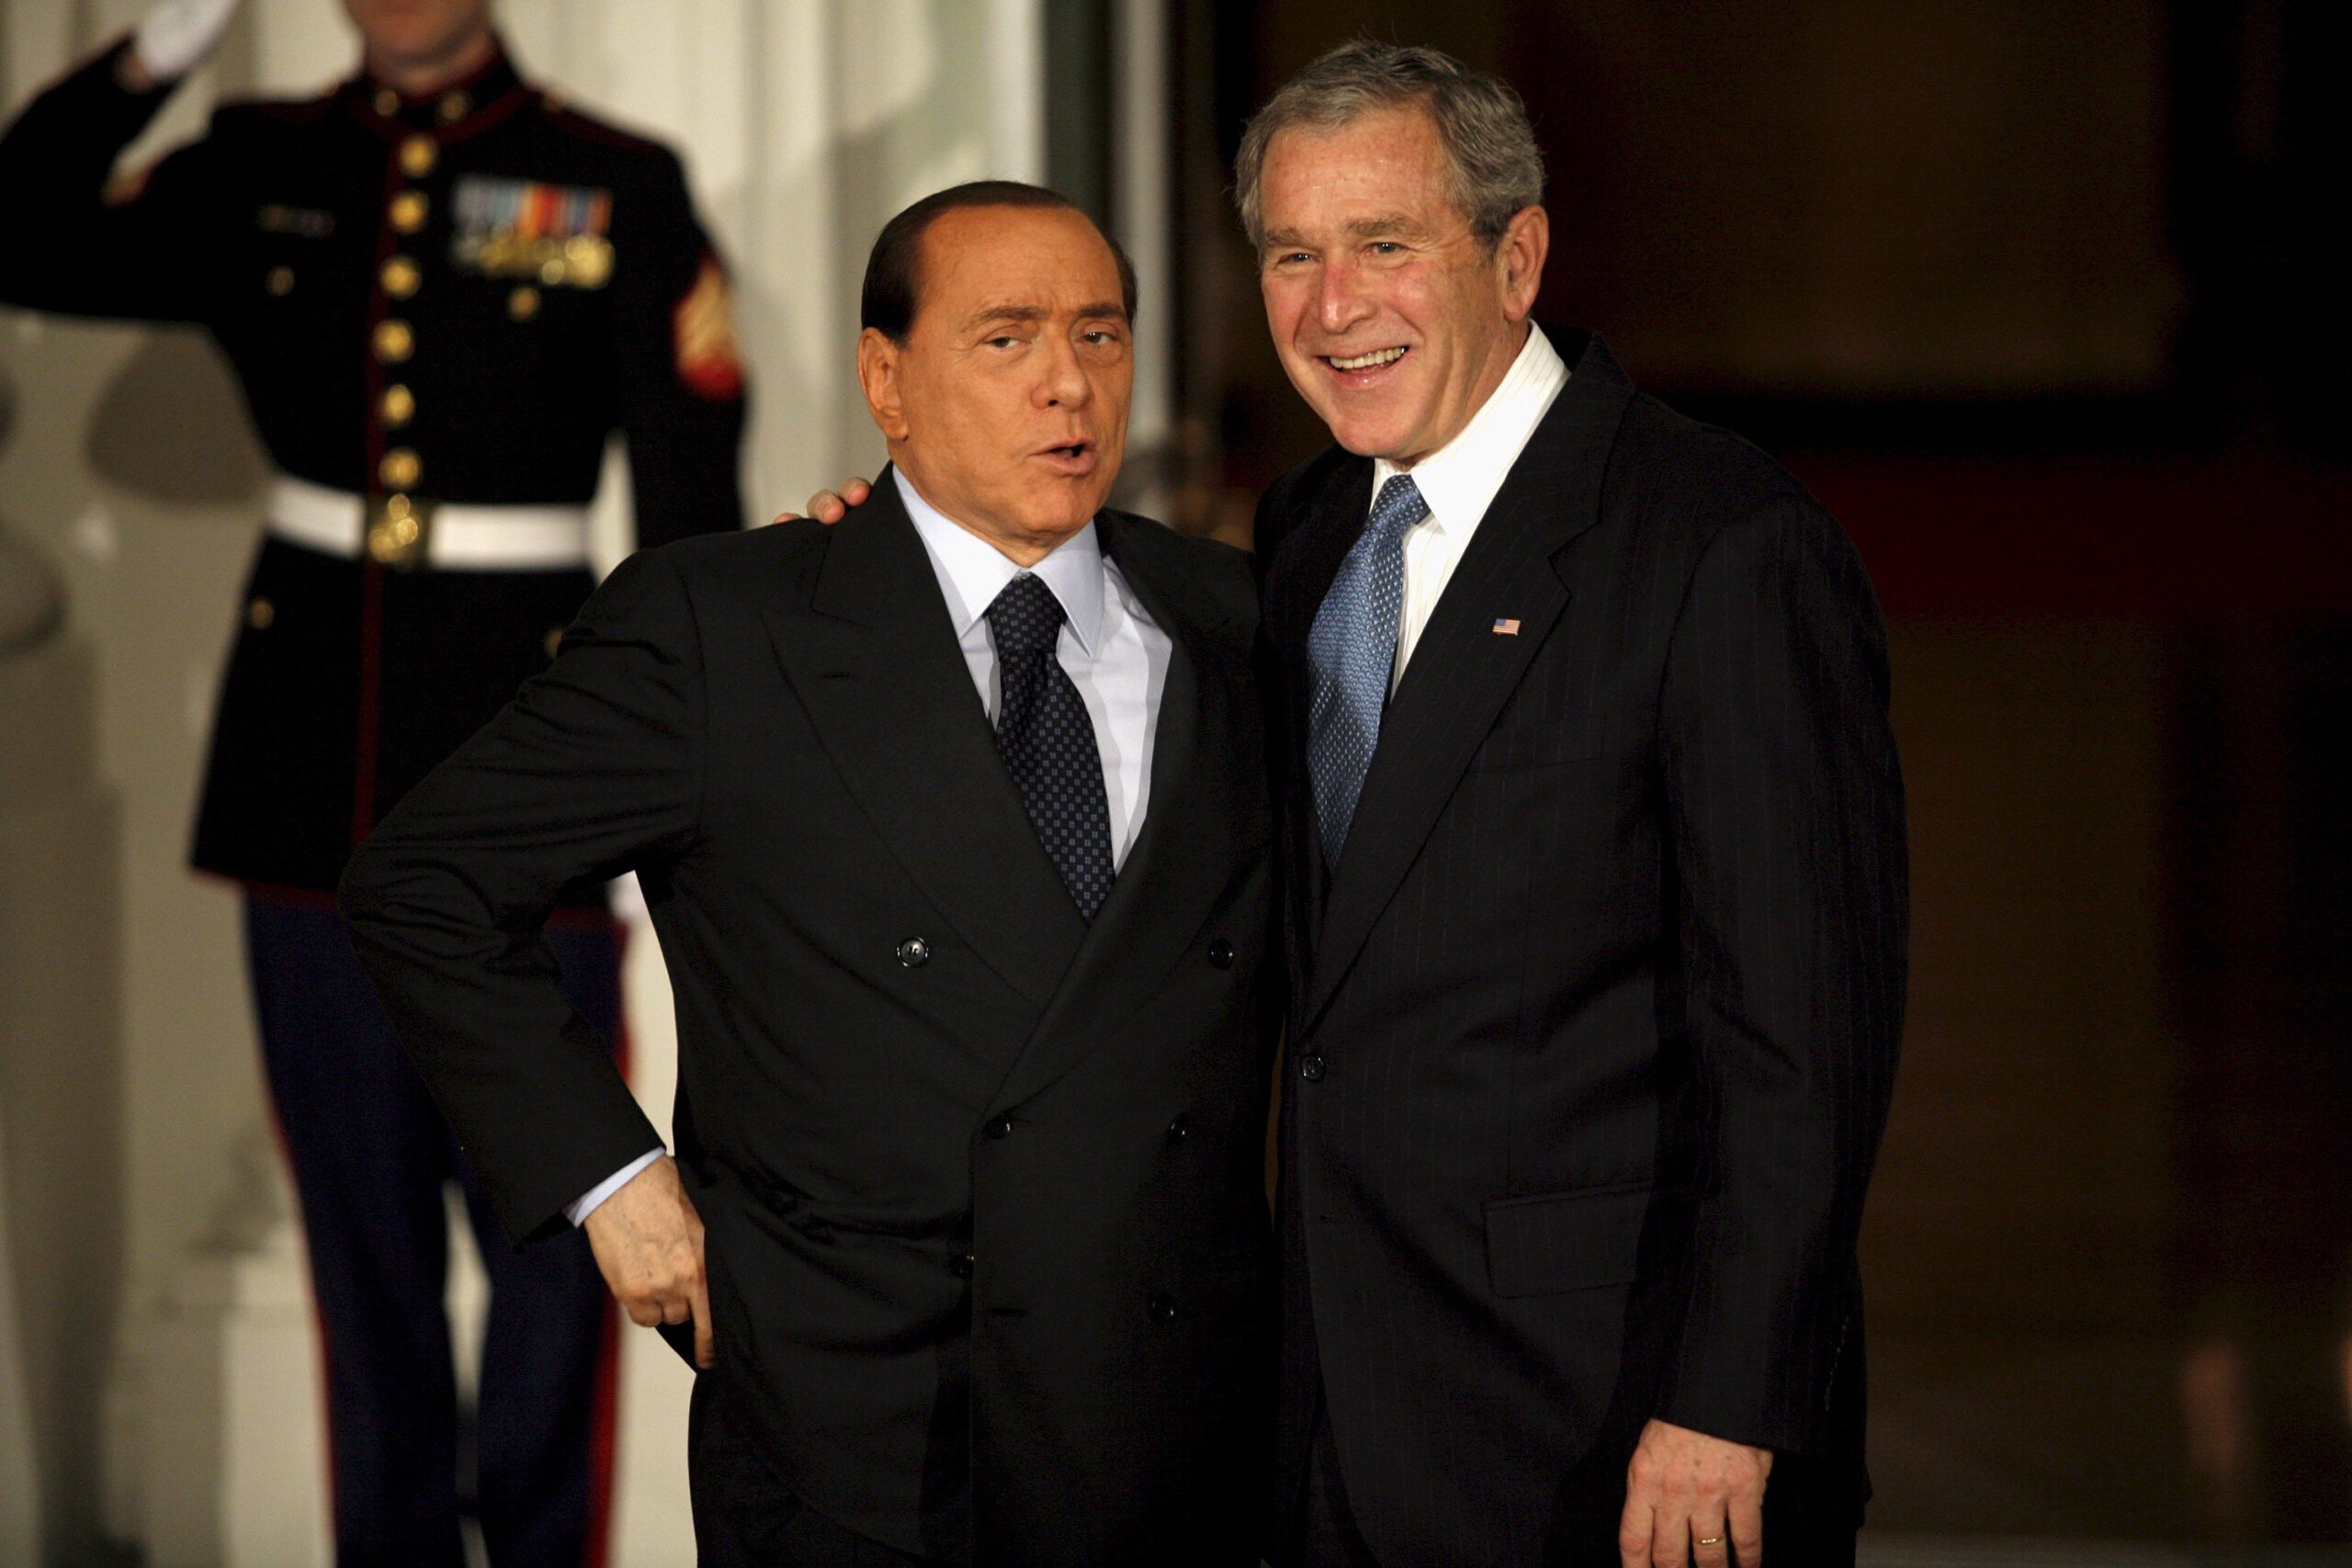 epa01550996 US President George W. Bush greets Silvio Berlusconi, Prime Minister of Italy to the White House for a working dinner at the start of the G20 Summit on Financial Markets and the World Economy in Washington, DC, USA, 14 November 2008.  EPA/Gary Fabiano / POOL